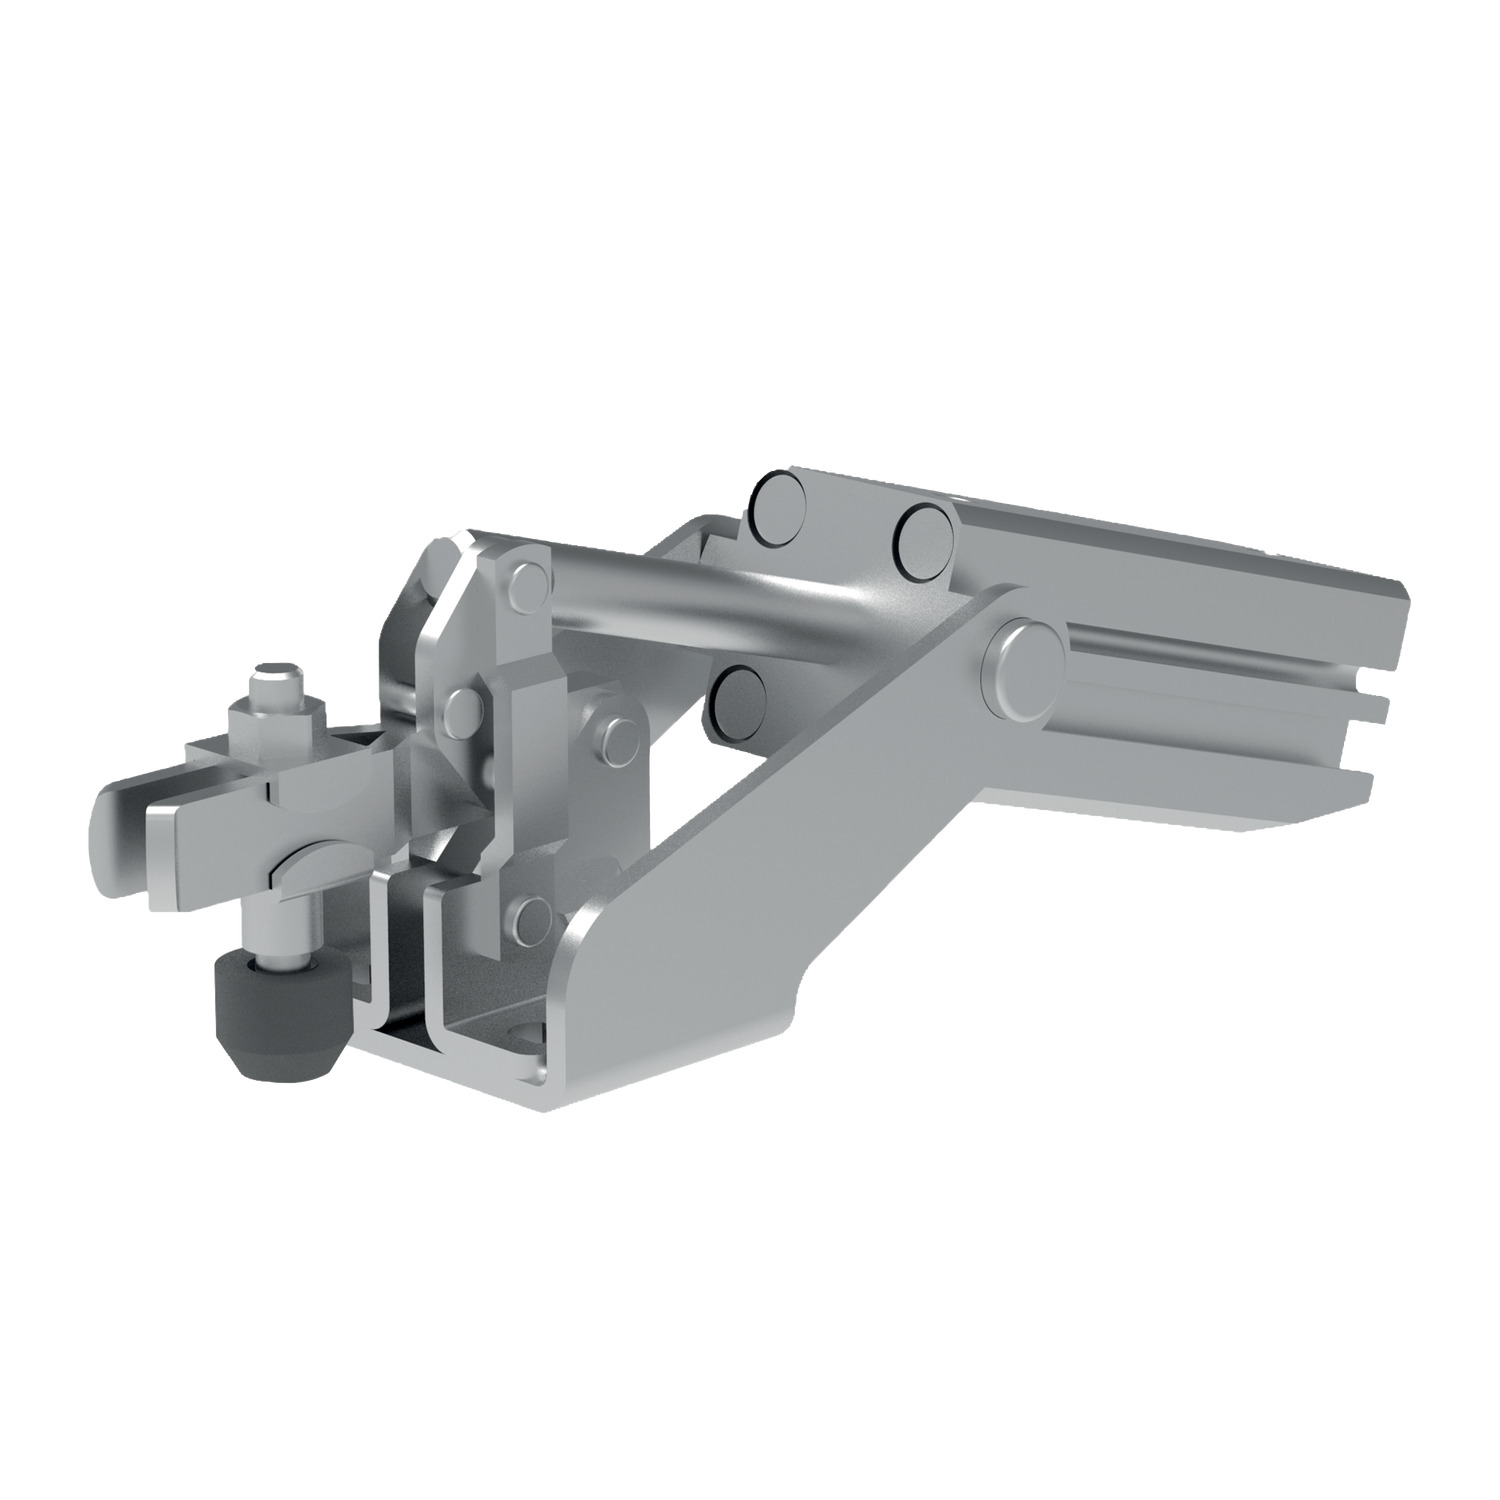 Product 47010, Pneumatic Toggle Clamp with horizontal cylinder attachment / 